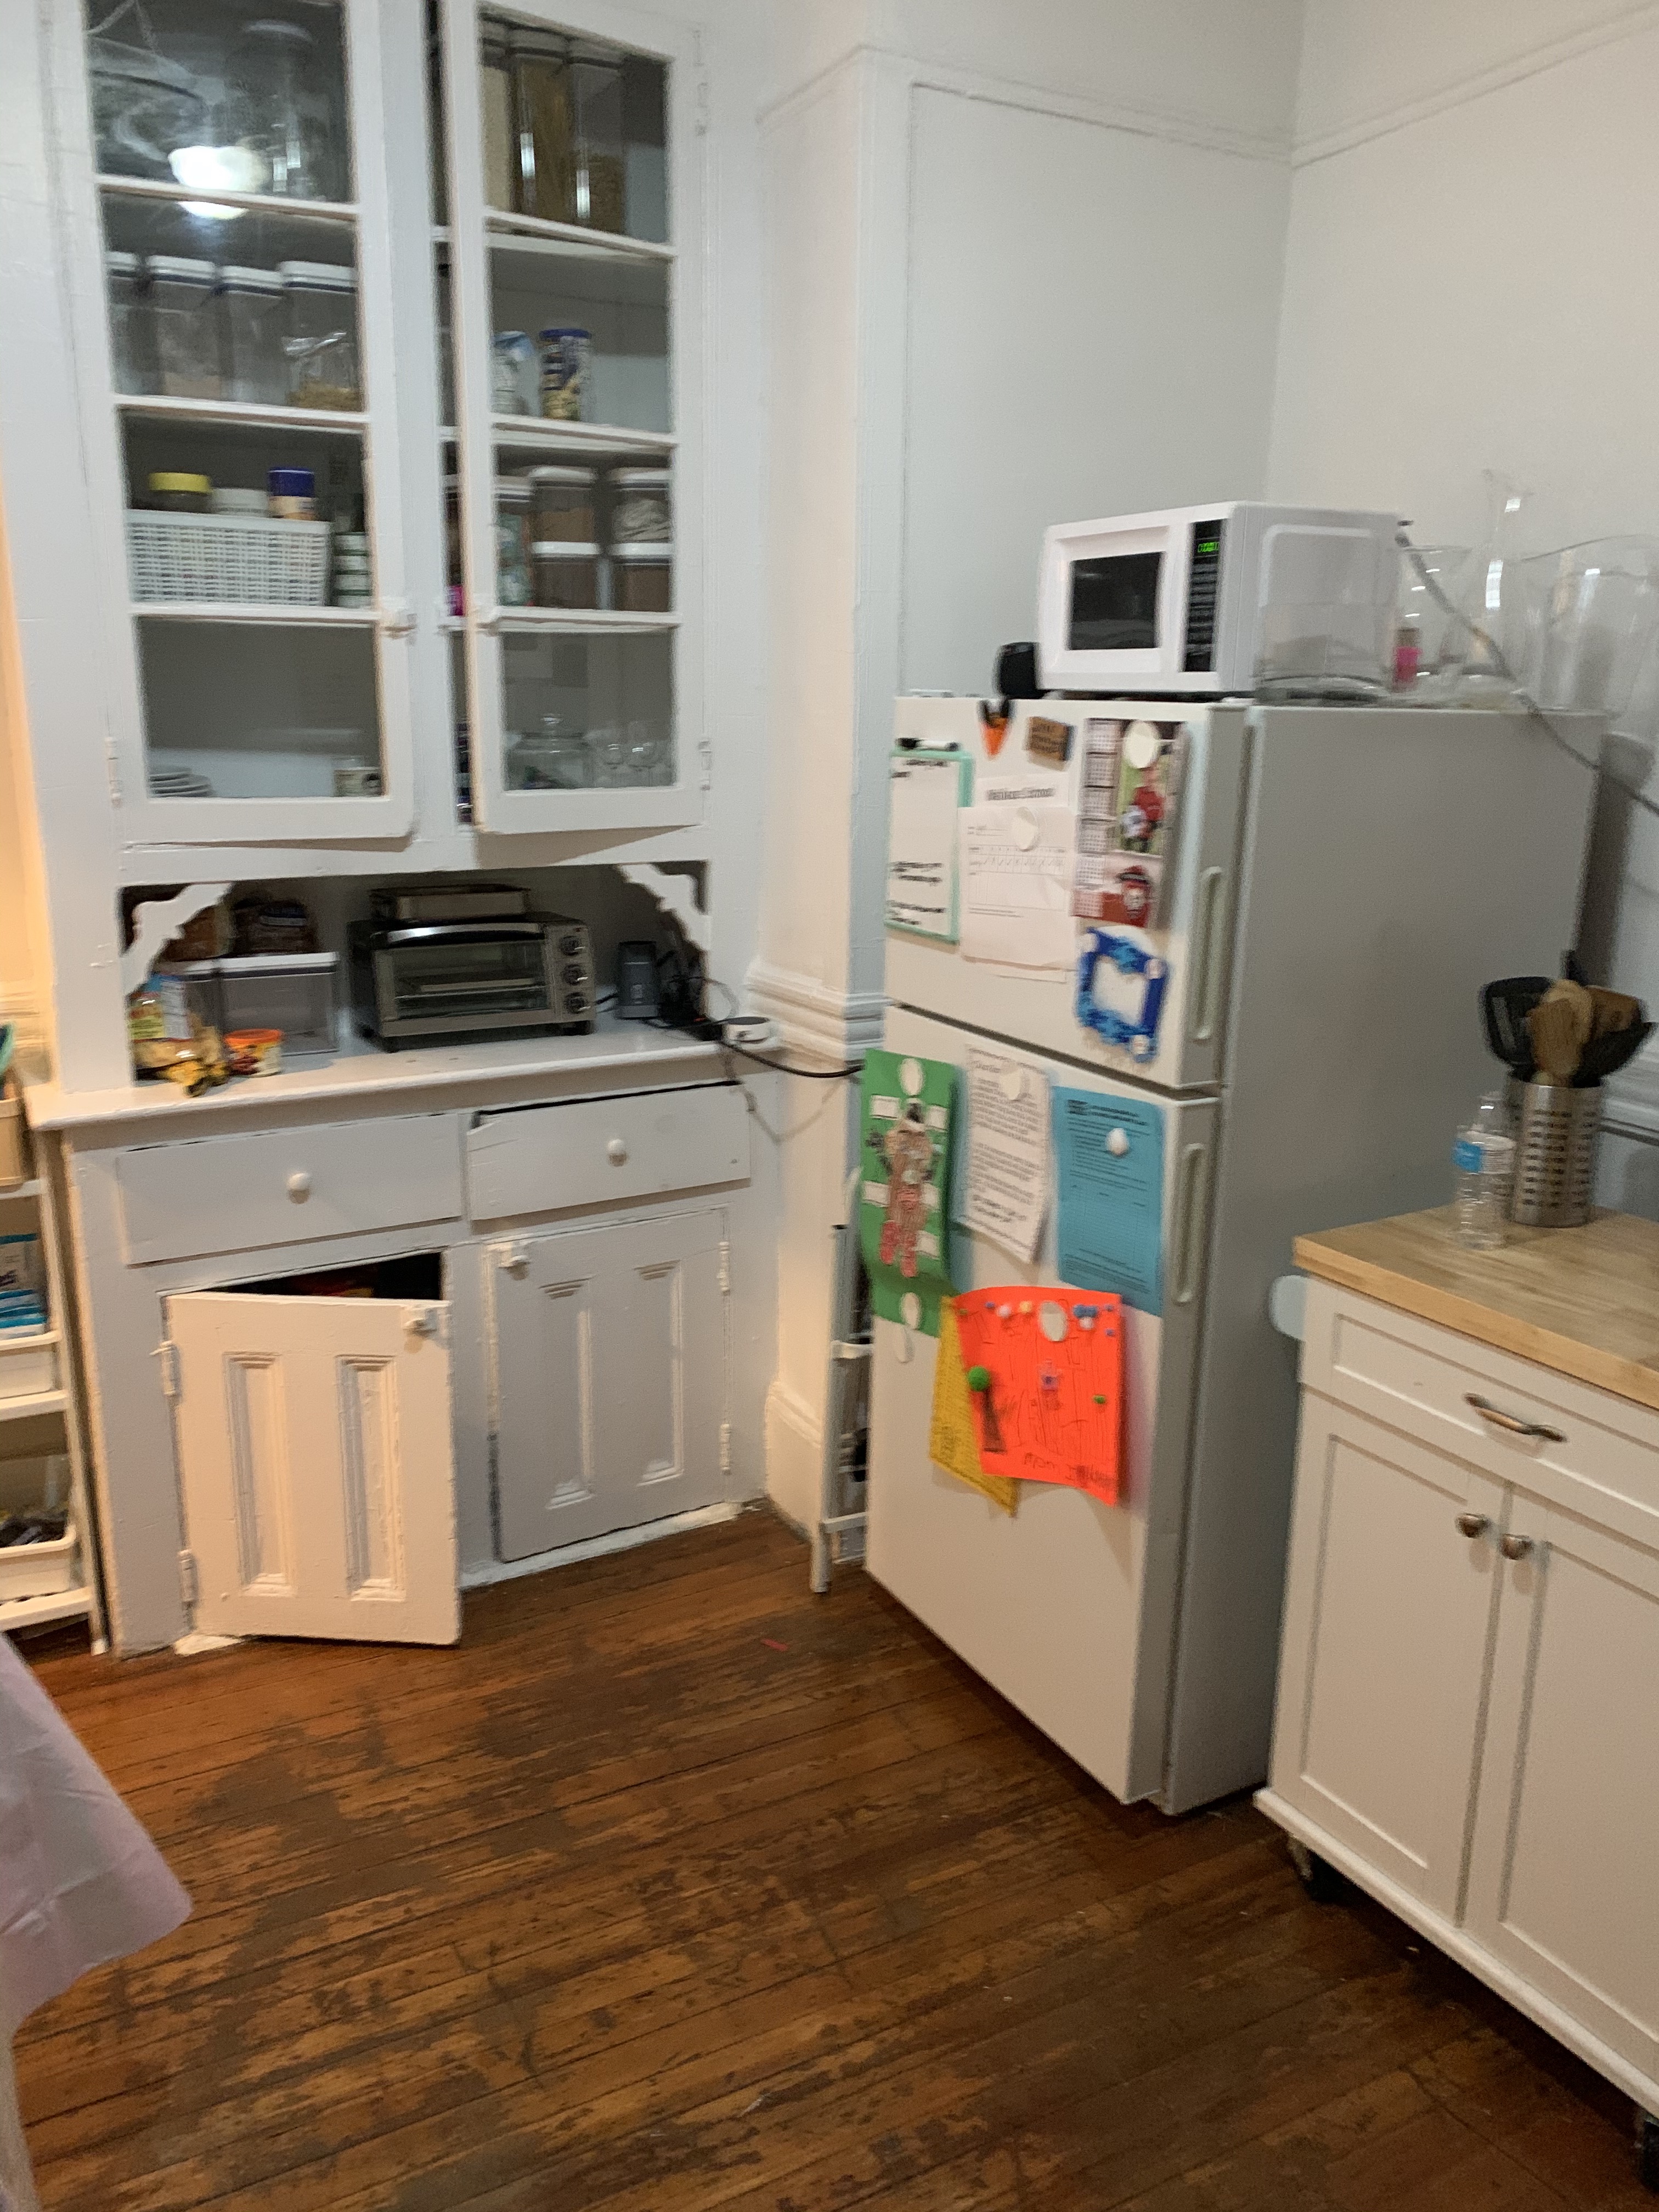 LOCATION LOCATION LOCATION! This 2 bedroom is in a great location! Right next to the entrance of Hoboken and Trader Joes! Plenty of restaurants and a movie theater nearby! Short distance to bus stops and the ferry.

*Available 3/1/2020
*Pets allowed w/ nonrefundable $500 pet fee and LL approval
*Photos of similar unit in building